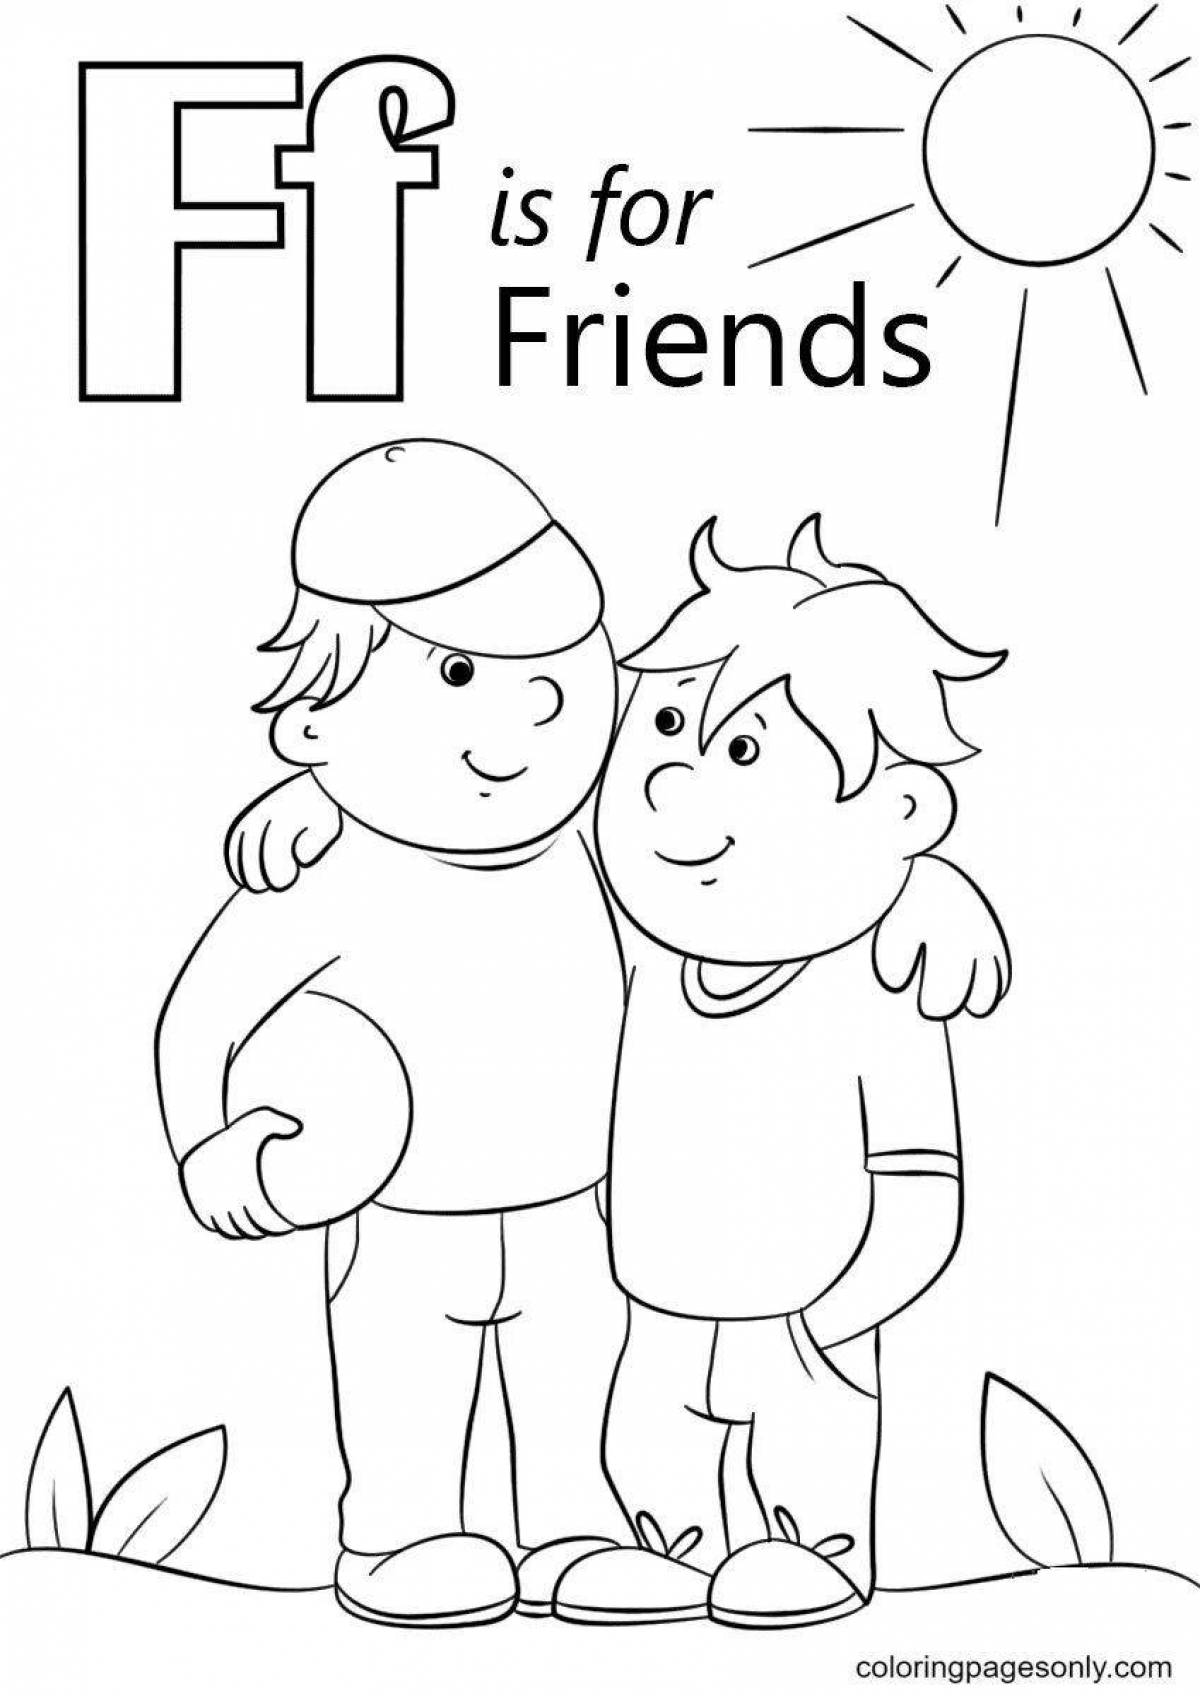 Me and my friends coloring page